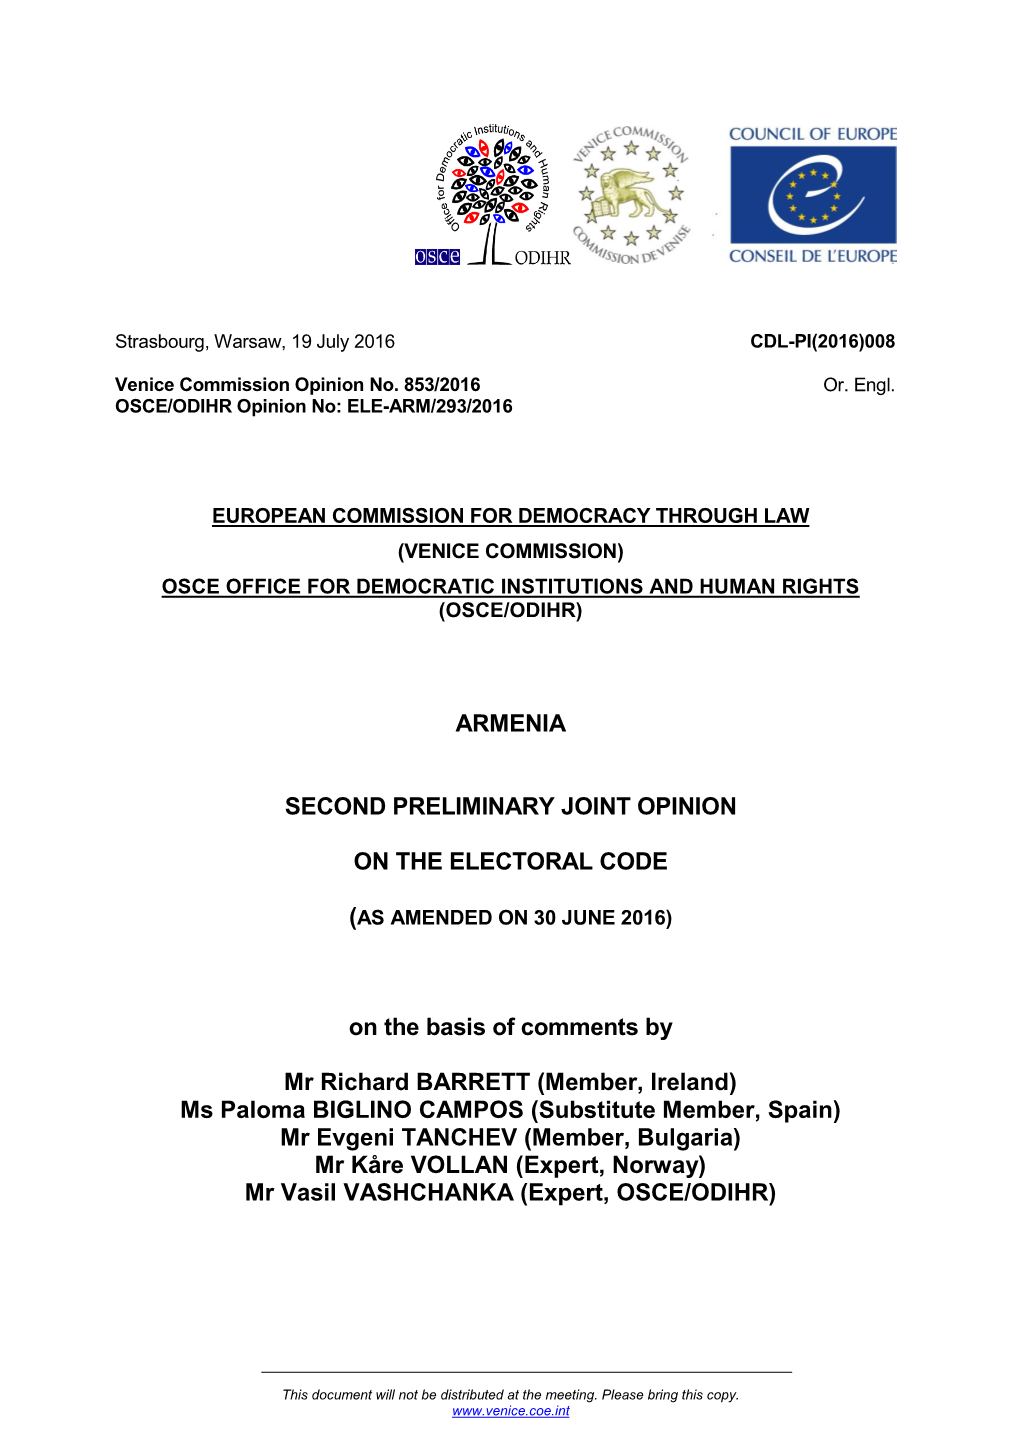 Second Preliminary Joint Opinion on the Electoral Code of Armenia